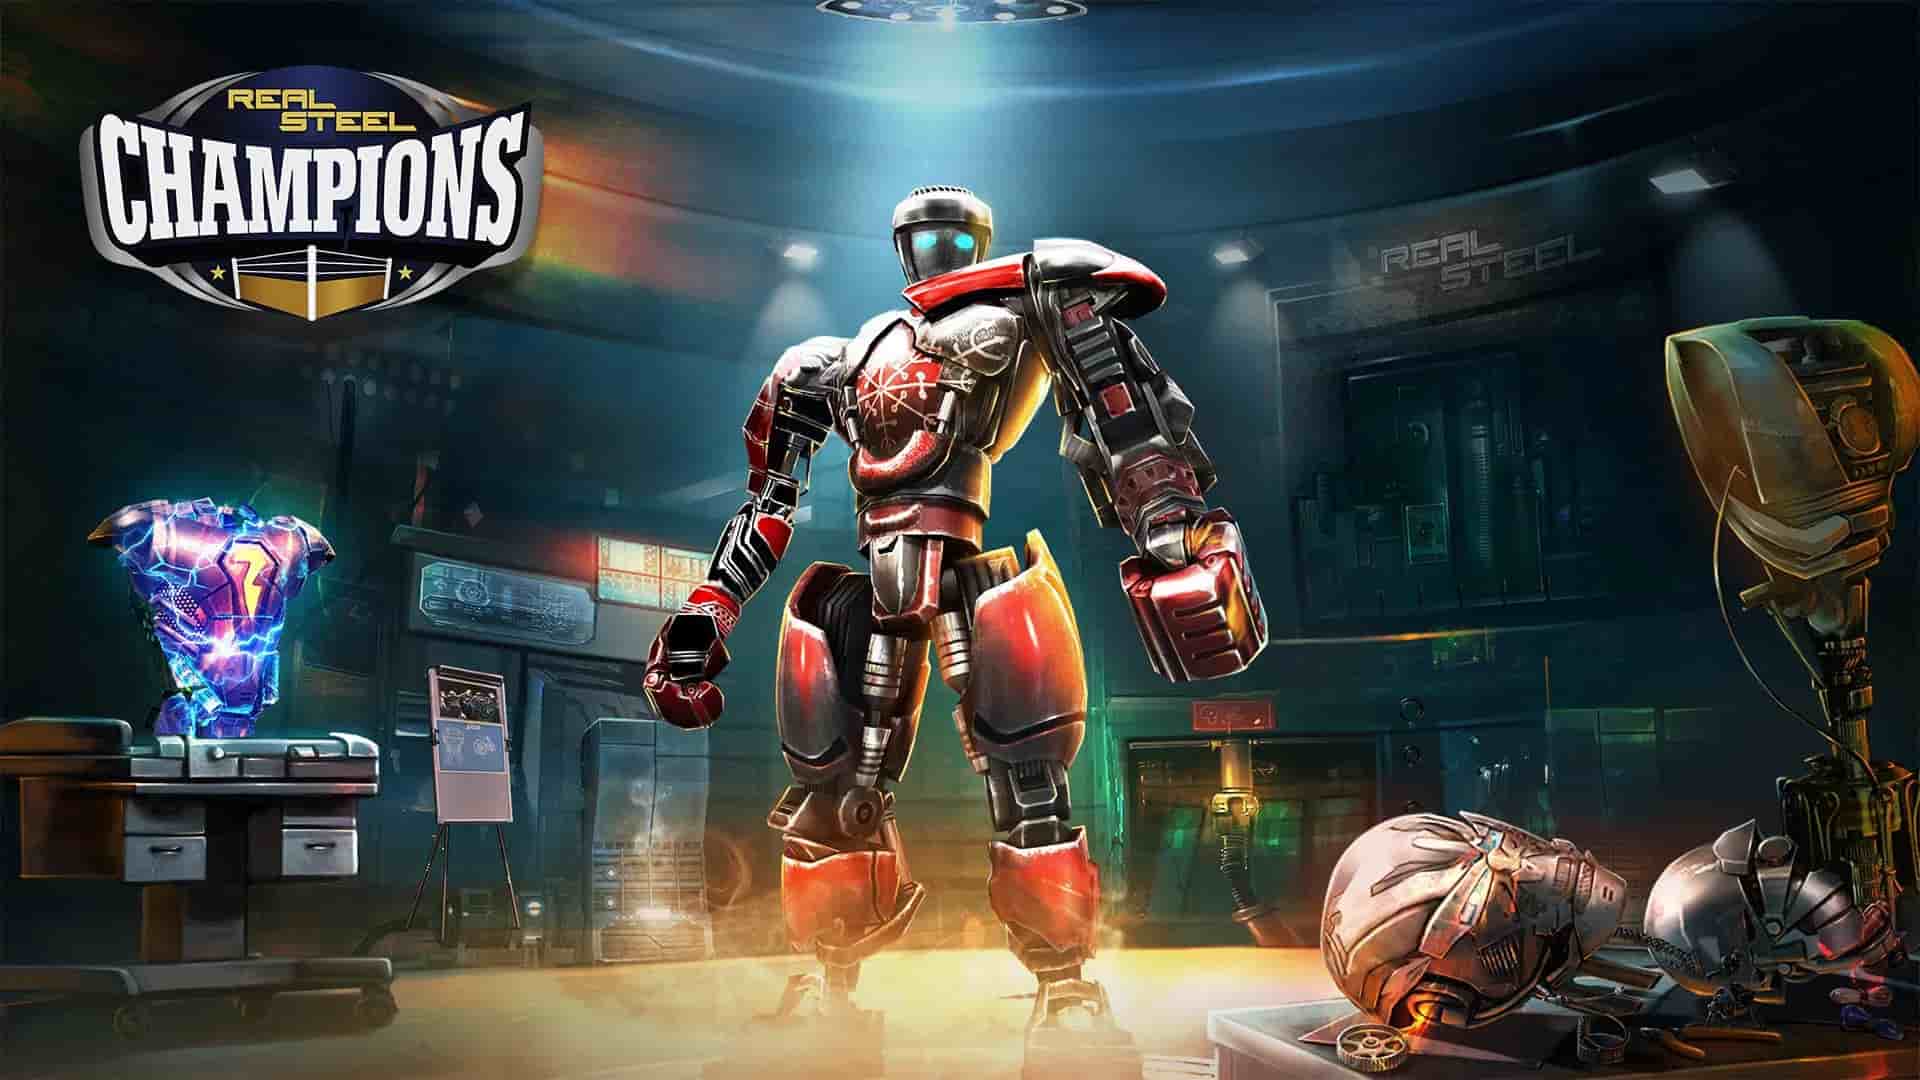 Download the Real Steel Boxing Champion